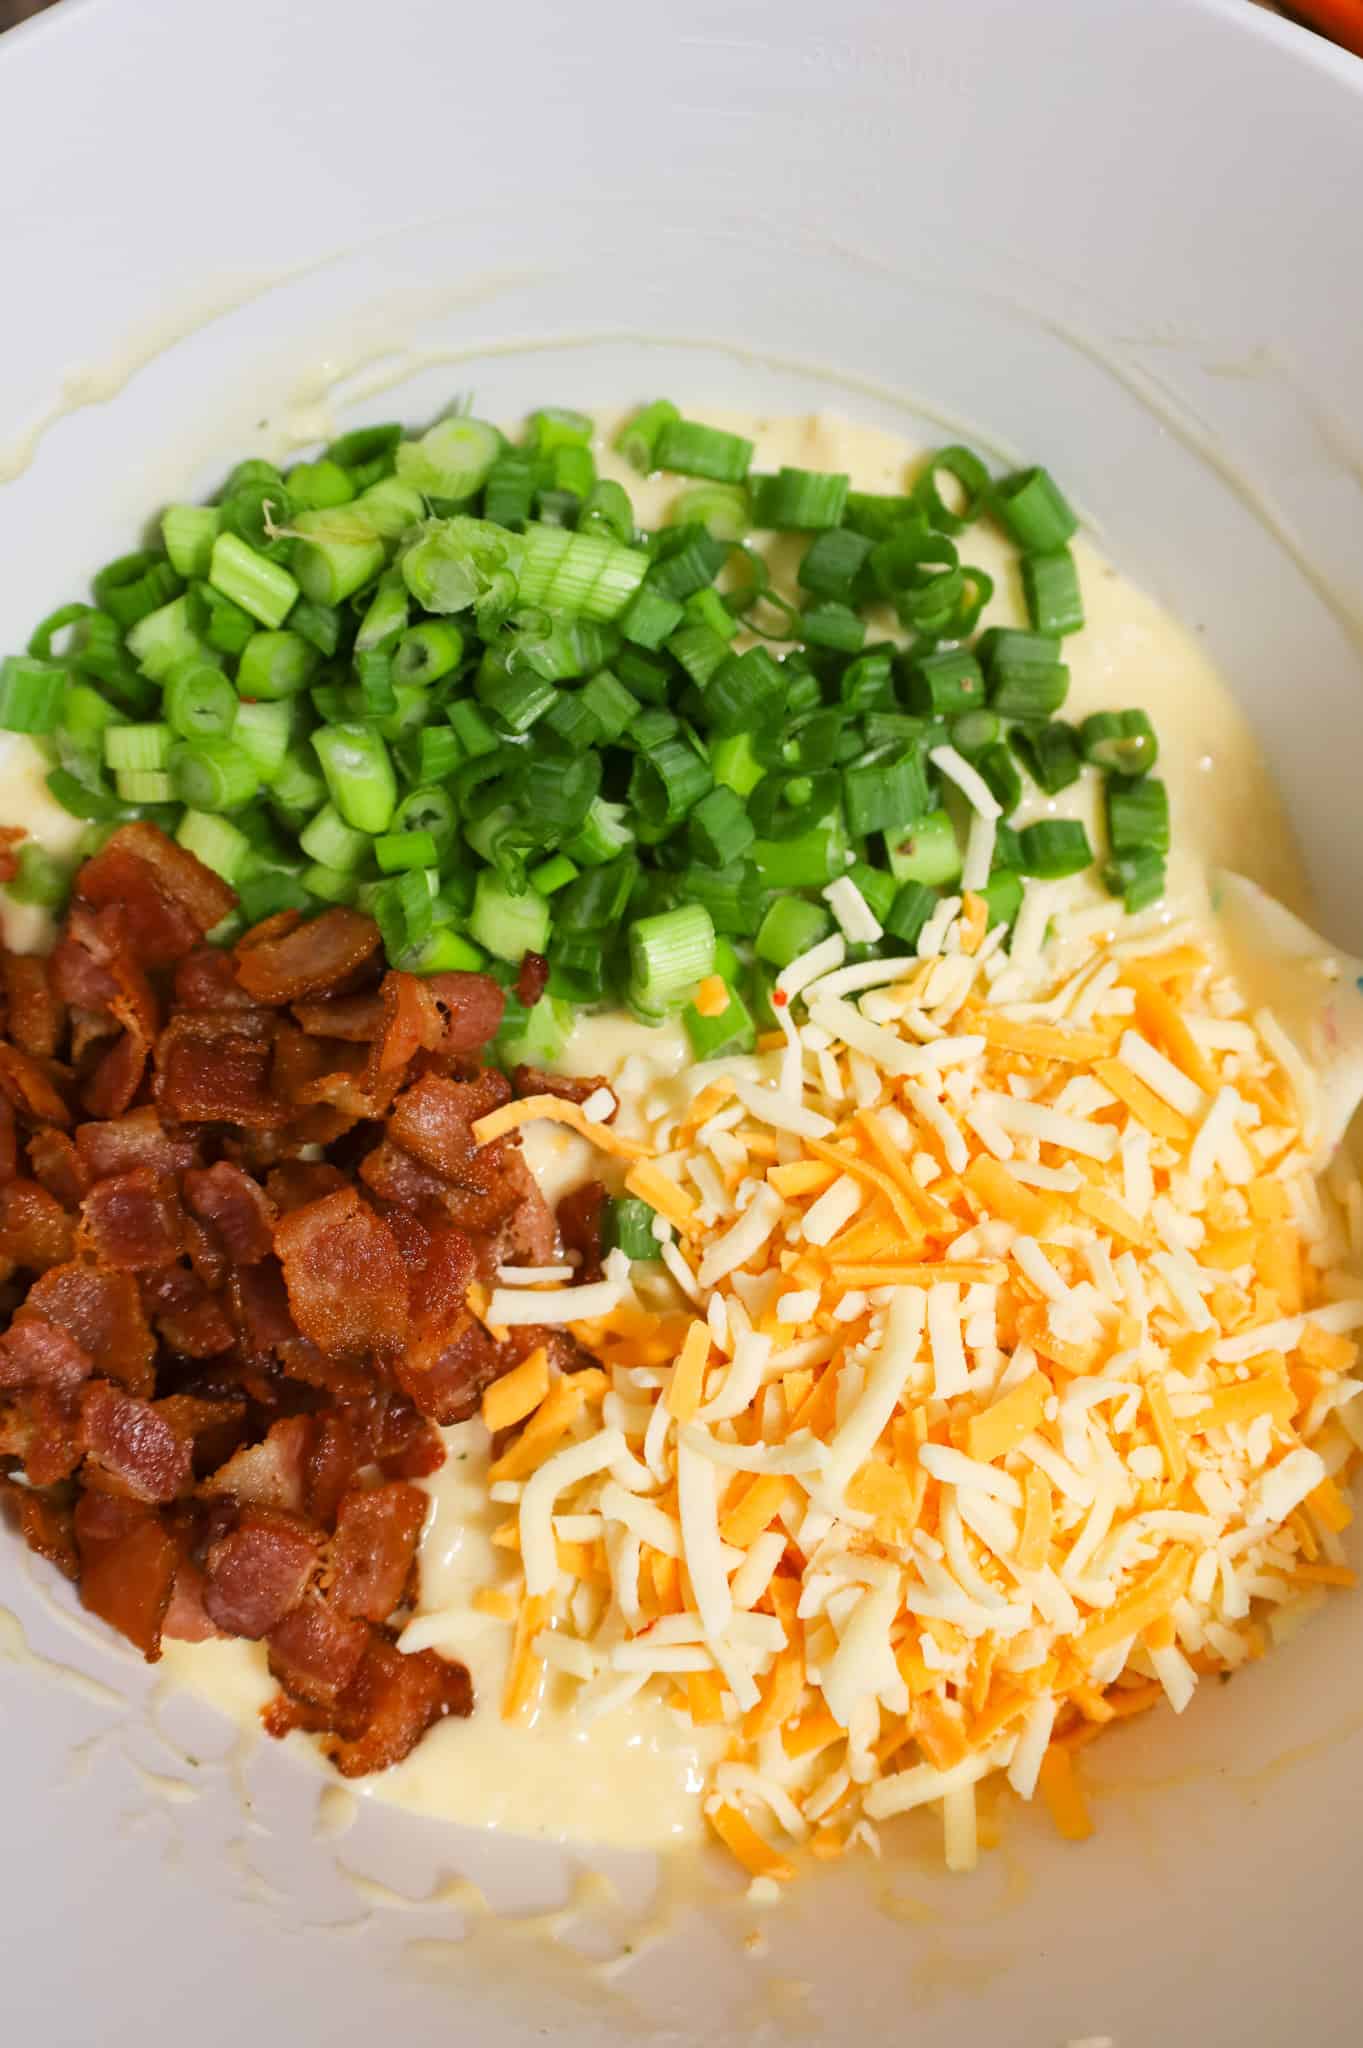 cooked bacon pieces, chopped green onions and shredded cheese on top of creamy chicken mixture in a mixing bowl